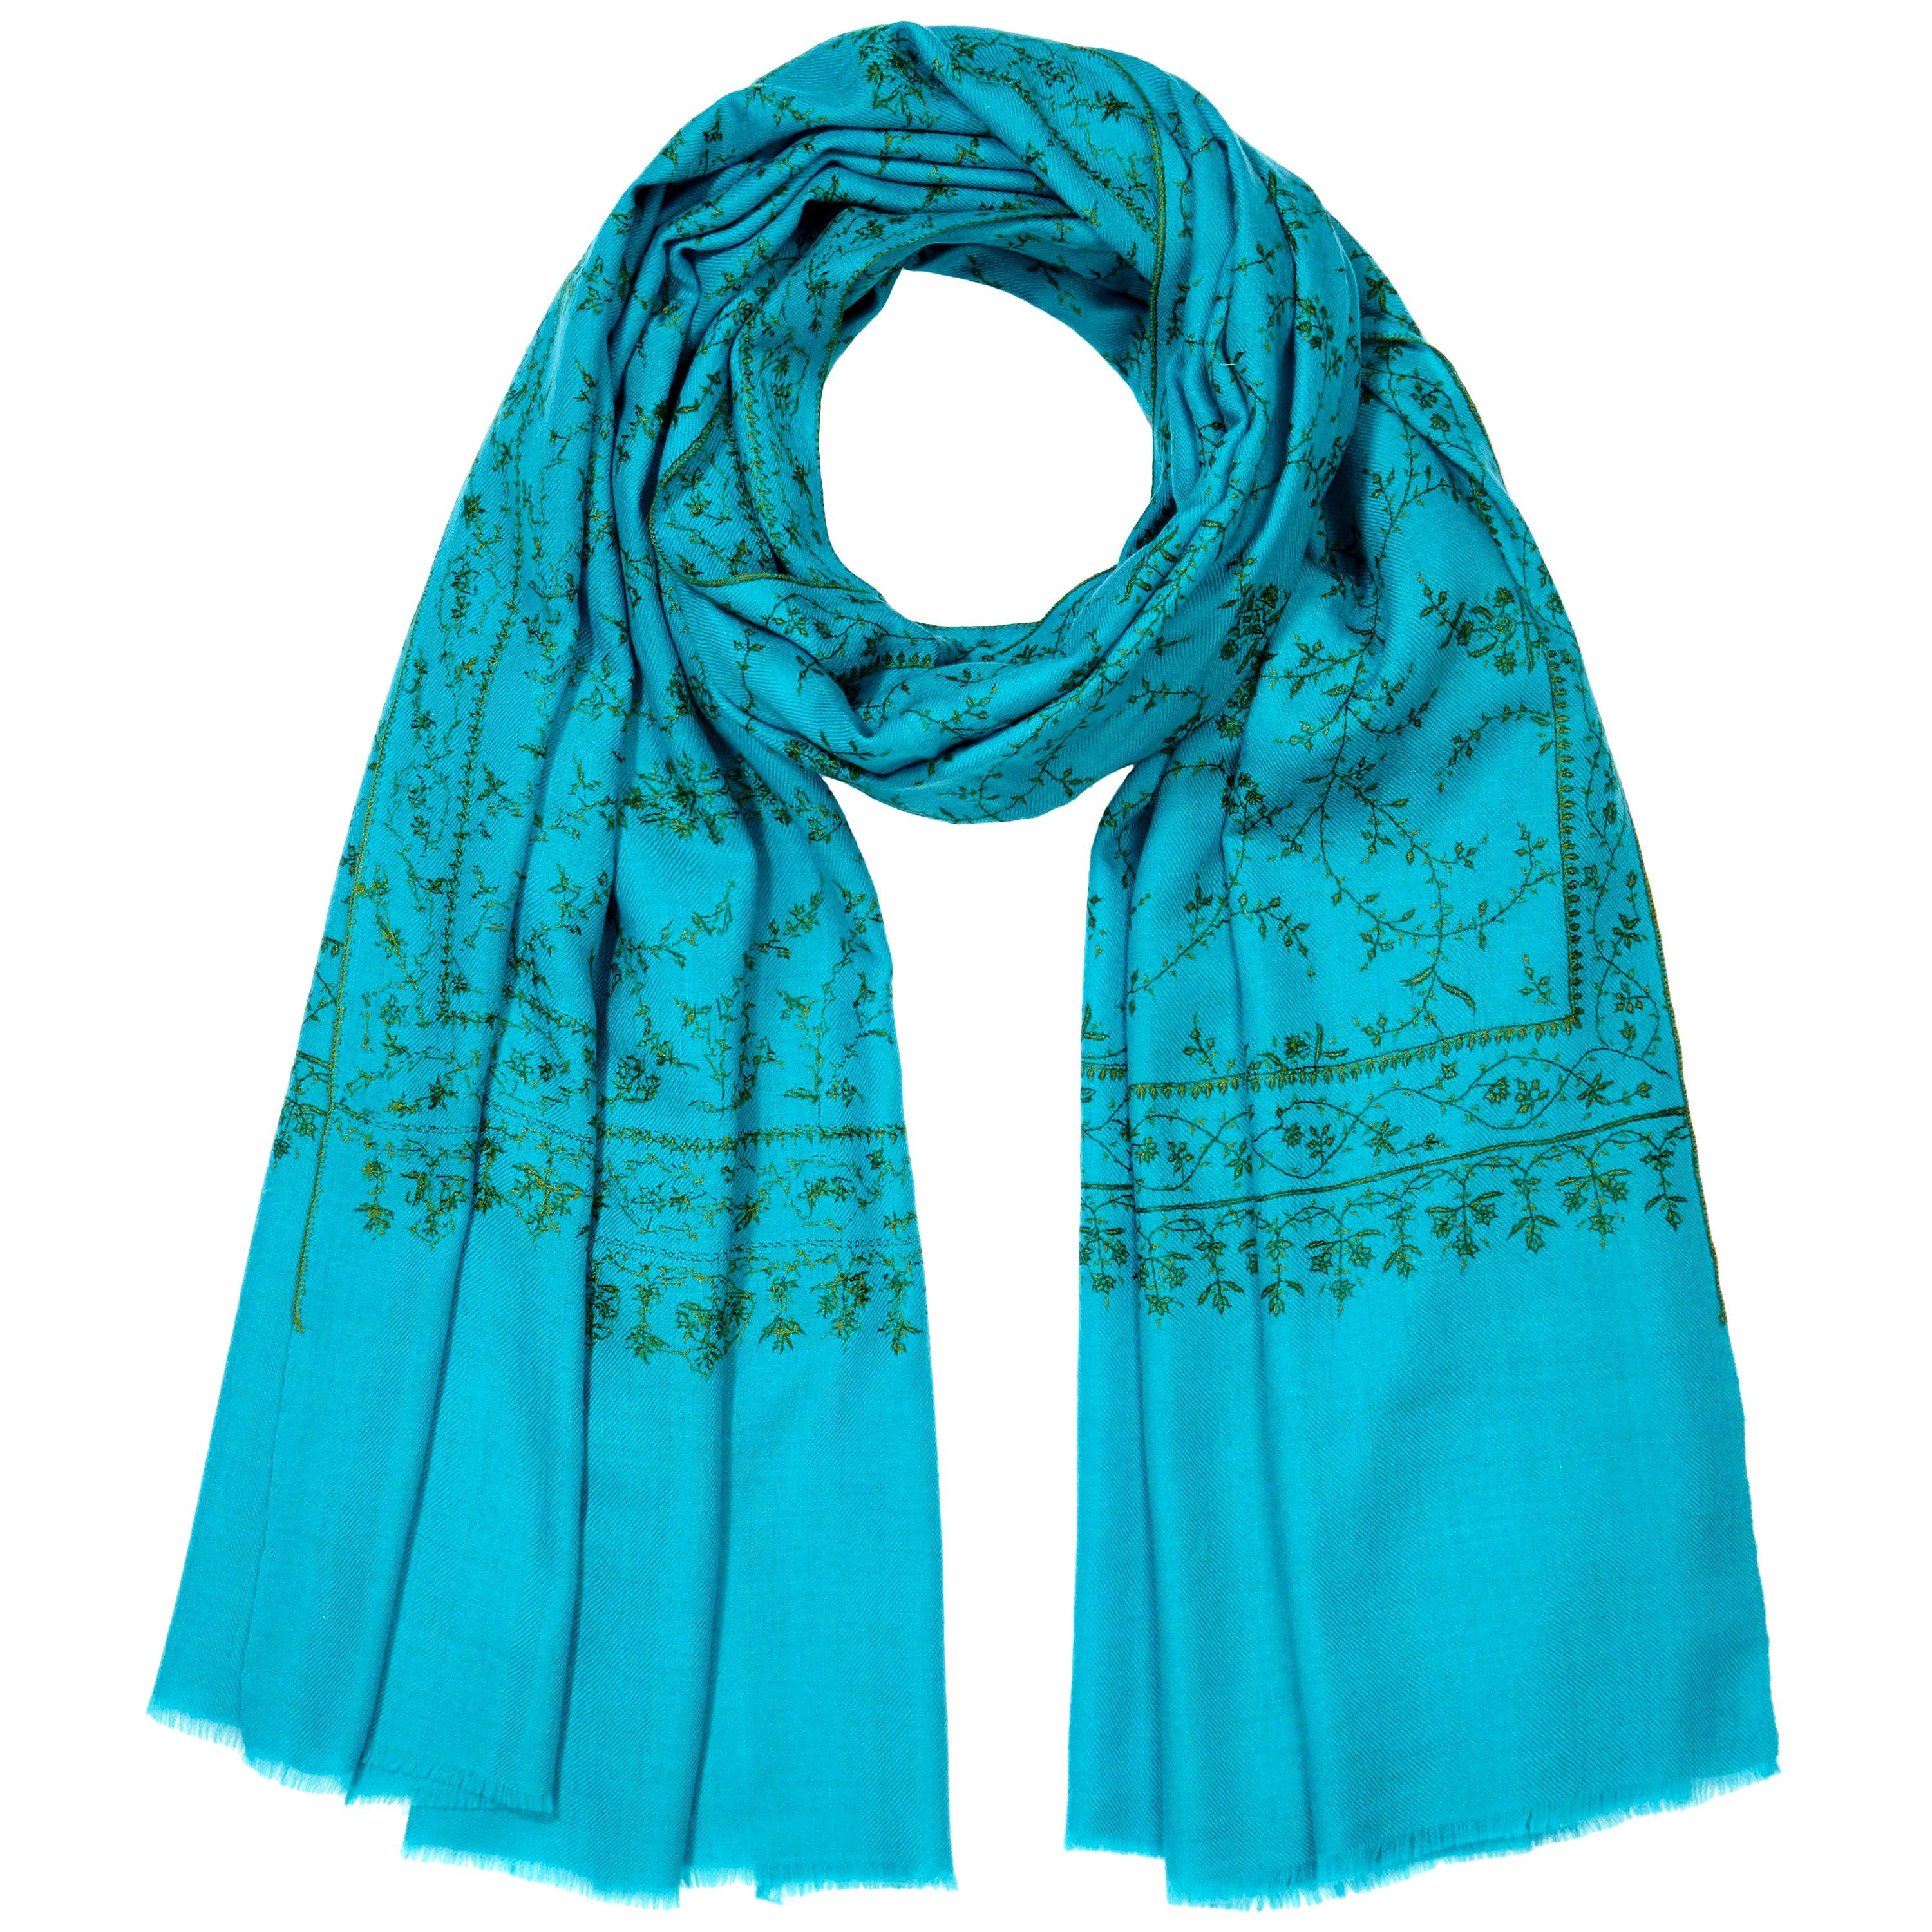 Hand Embroidered 100% Cashmere Shawl in Turquoise Made in Kashmir India